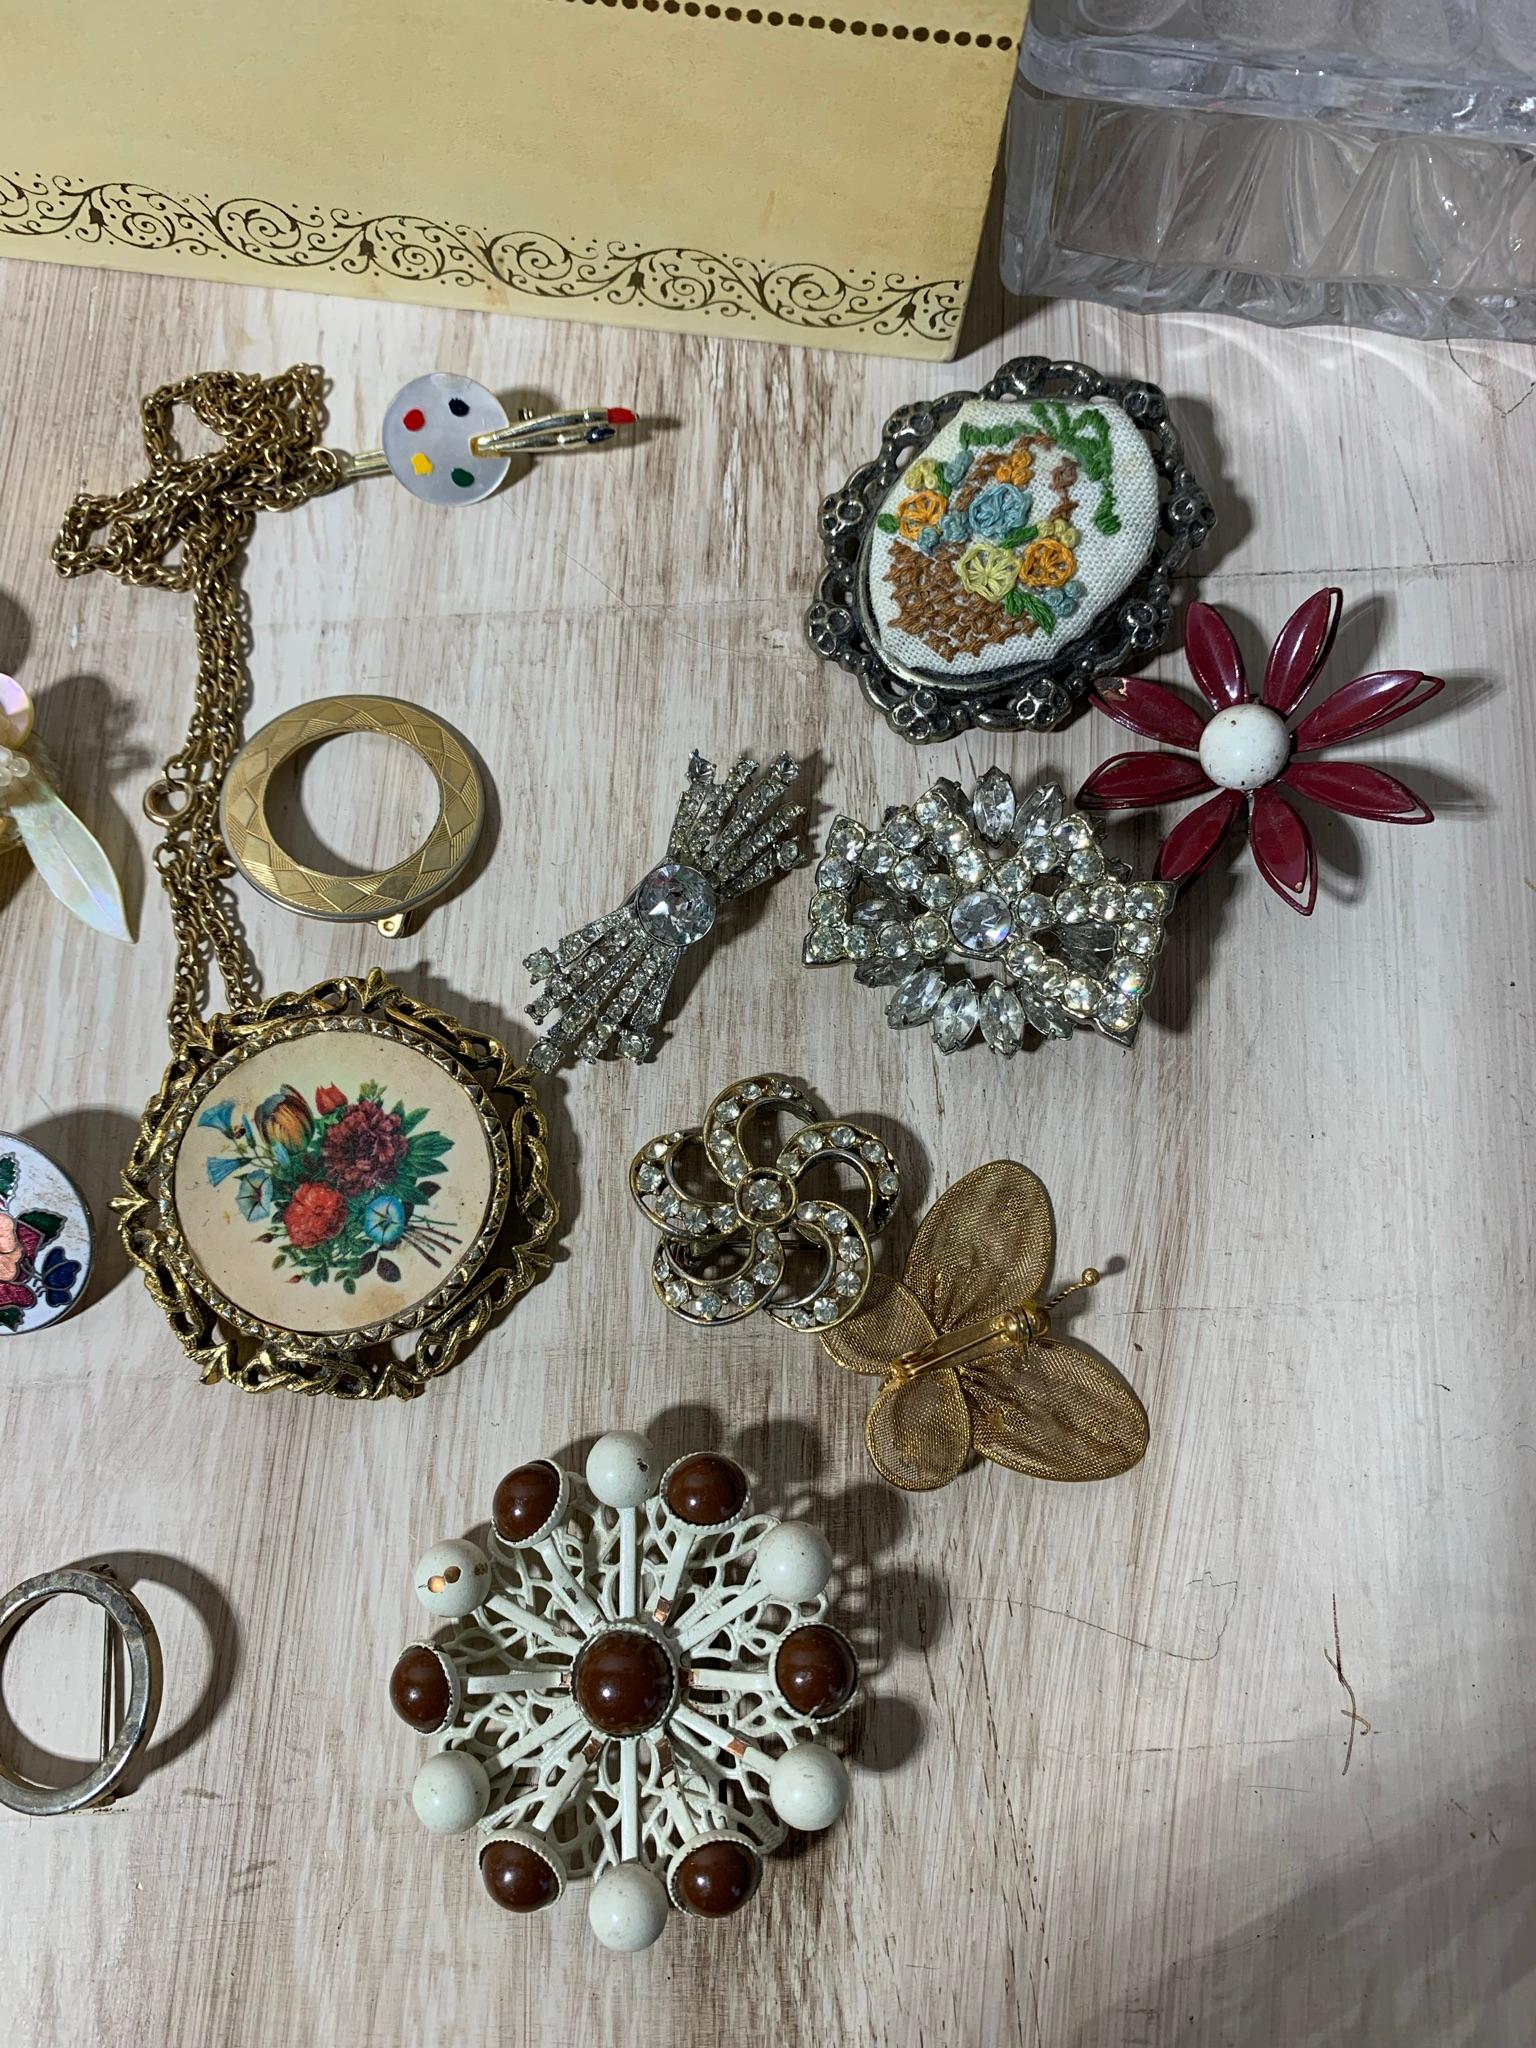 Group of Costume Jewelry Including Some Sterling Silver Items